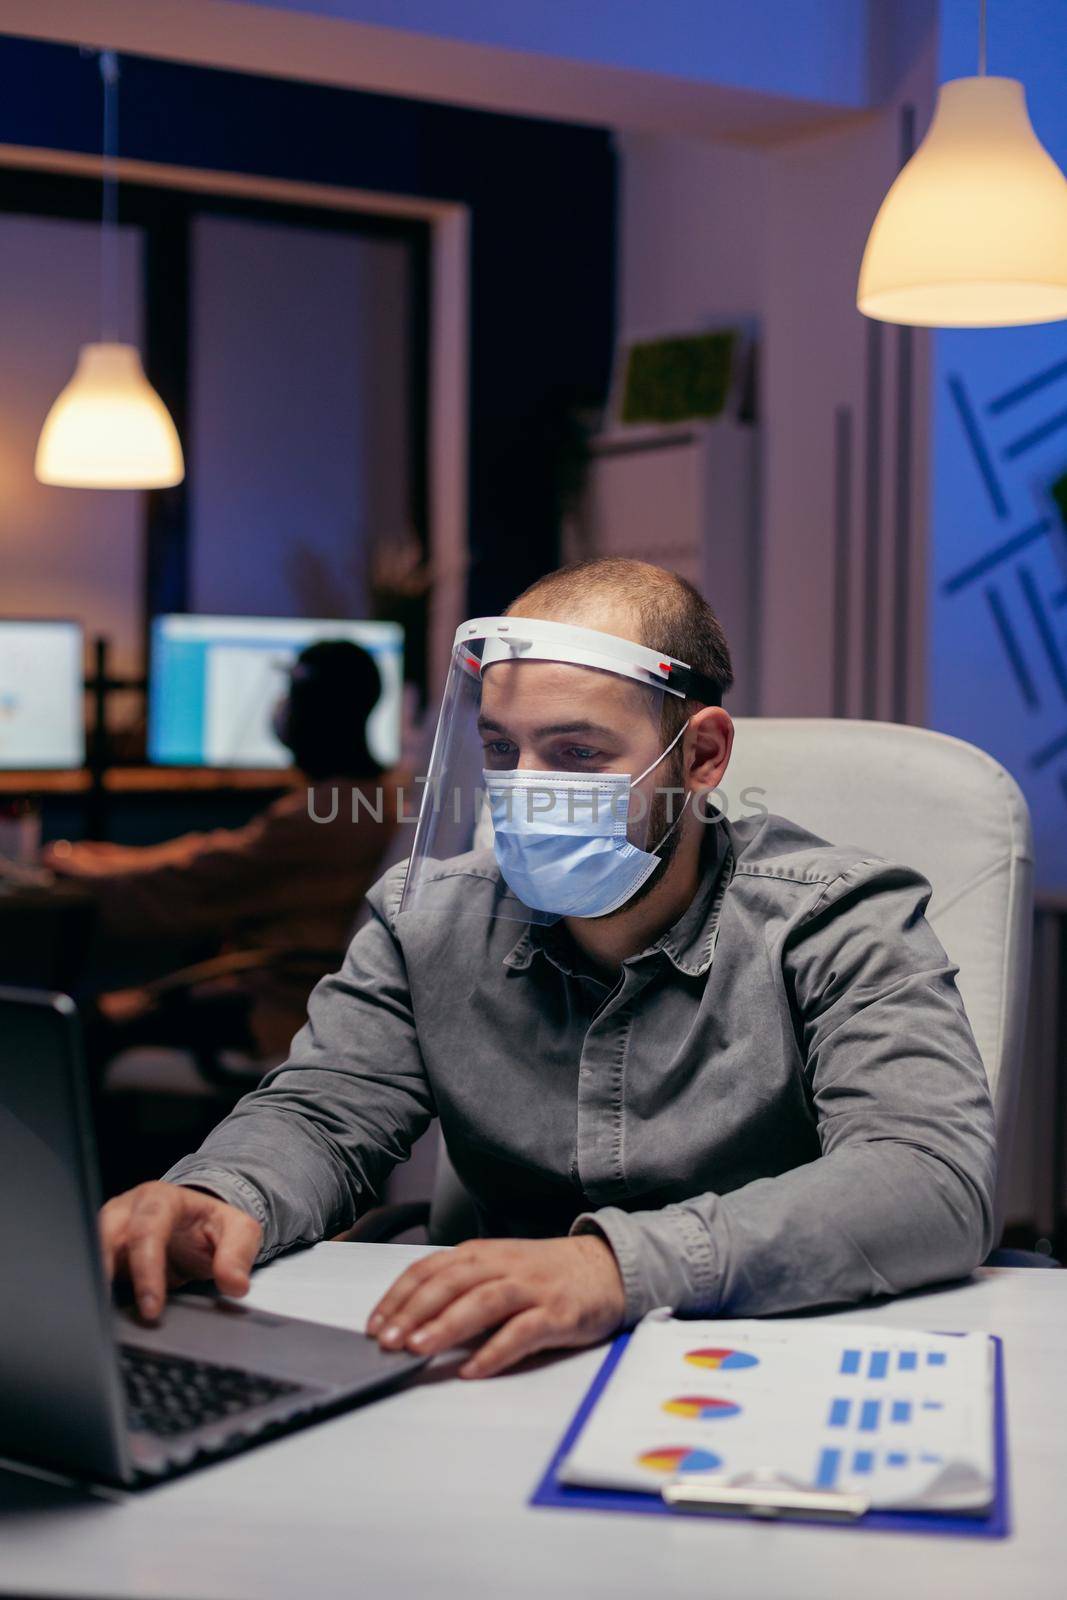 Manager and colleagues doing overtime with visor against covid-19. Stressed man in corporation working hard to finish a project wearing face mask as safety precaution due to coronavirus pandemic.